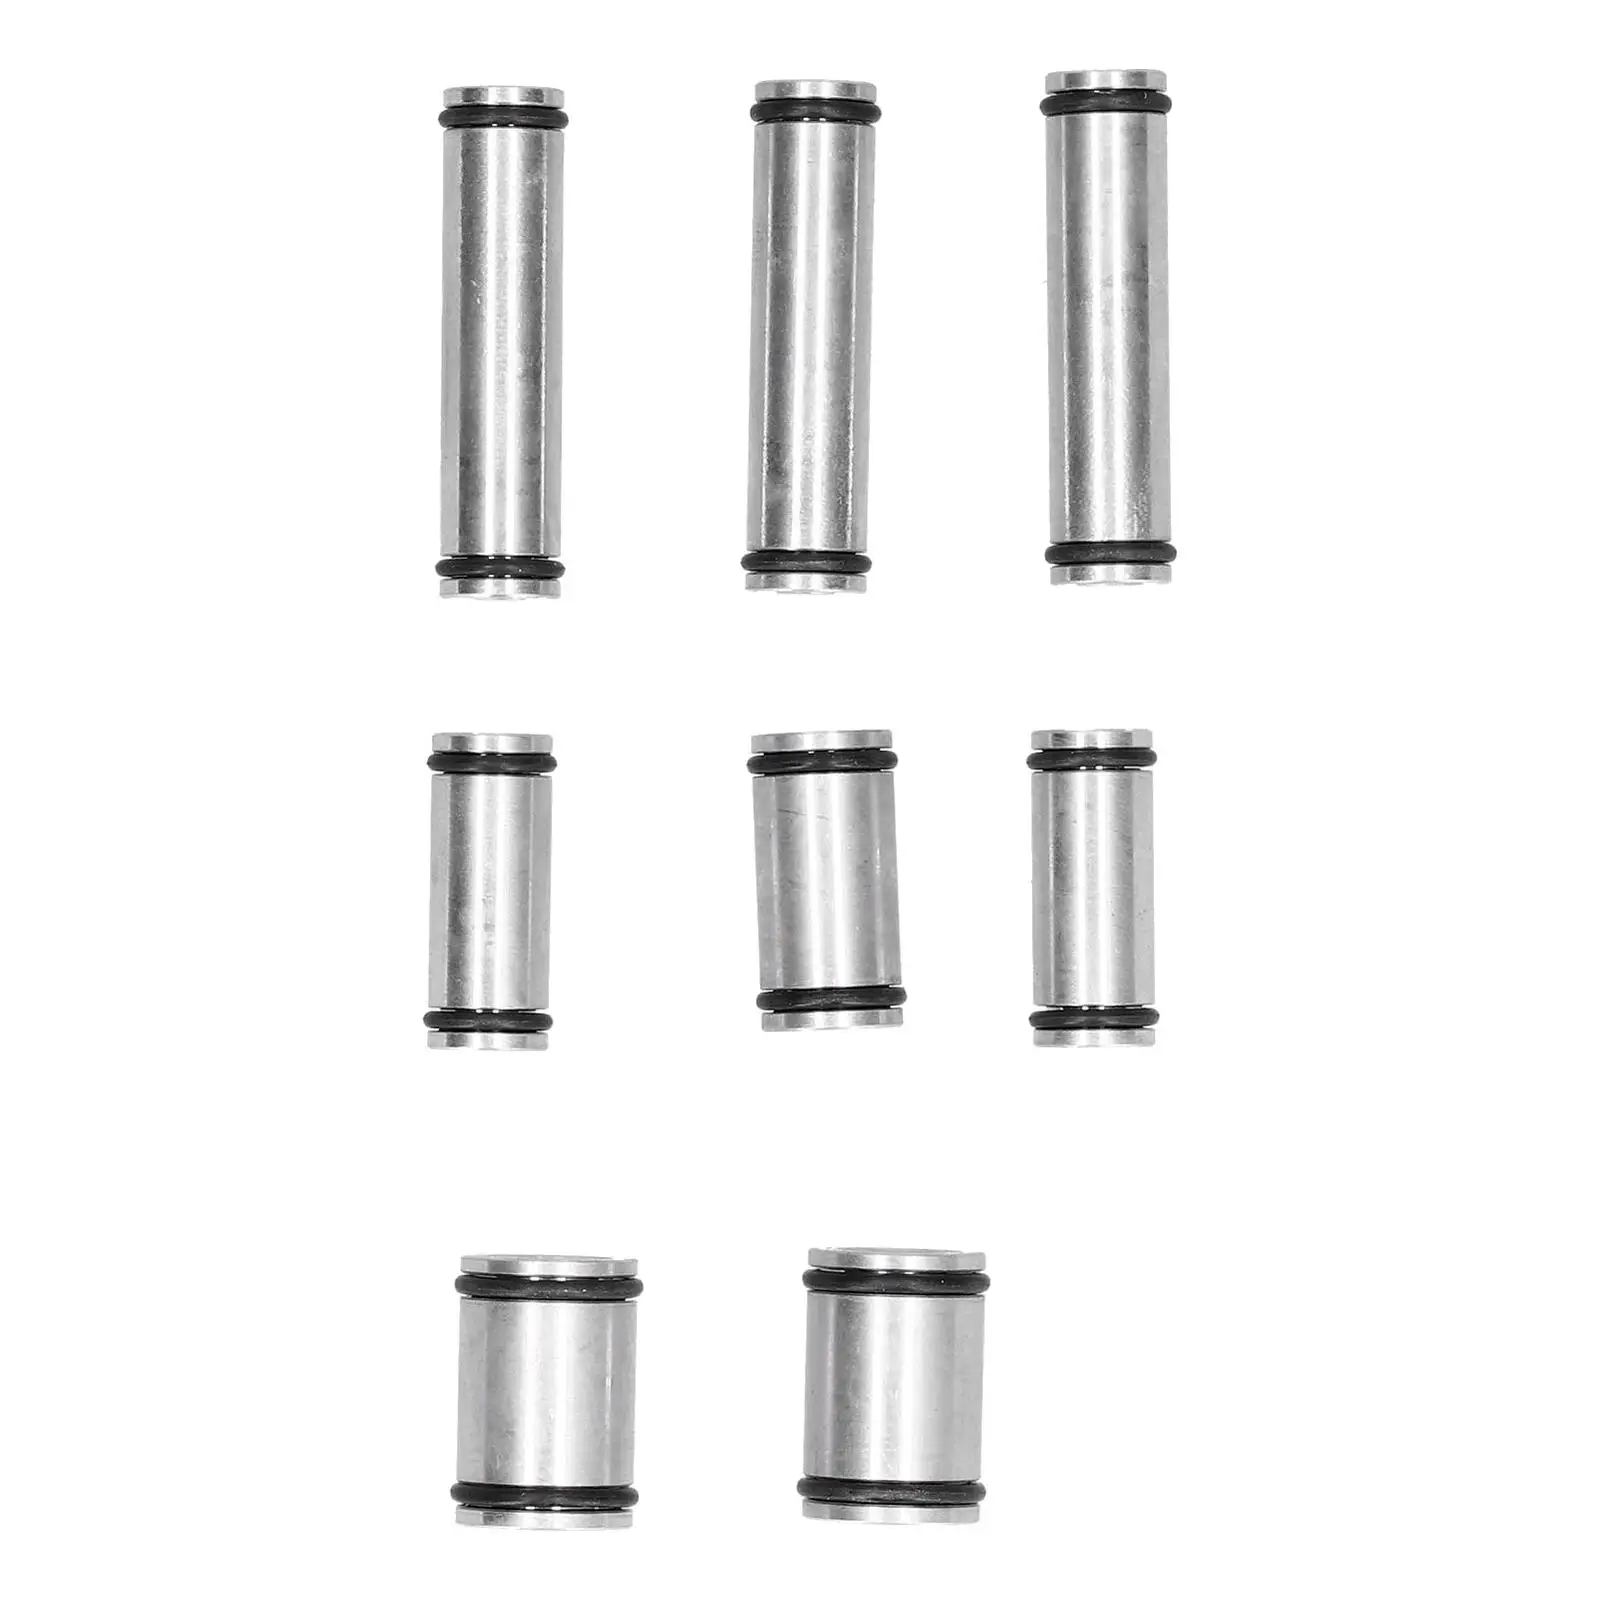 8 Pieces 0BH321477 Oil Pipe Kit Auto Car Replacement for Transporter 09-11 L4 2.0L